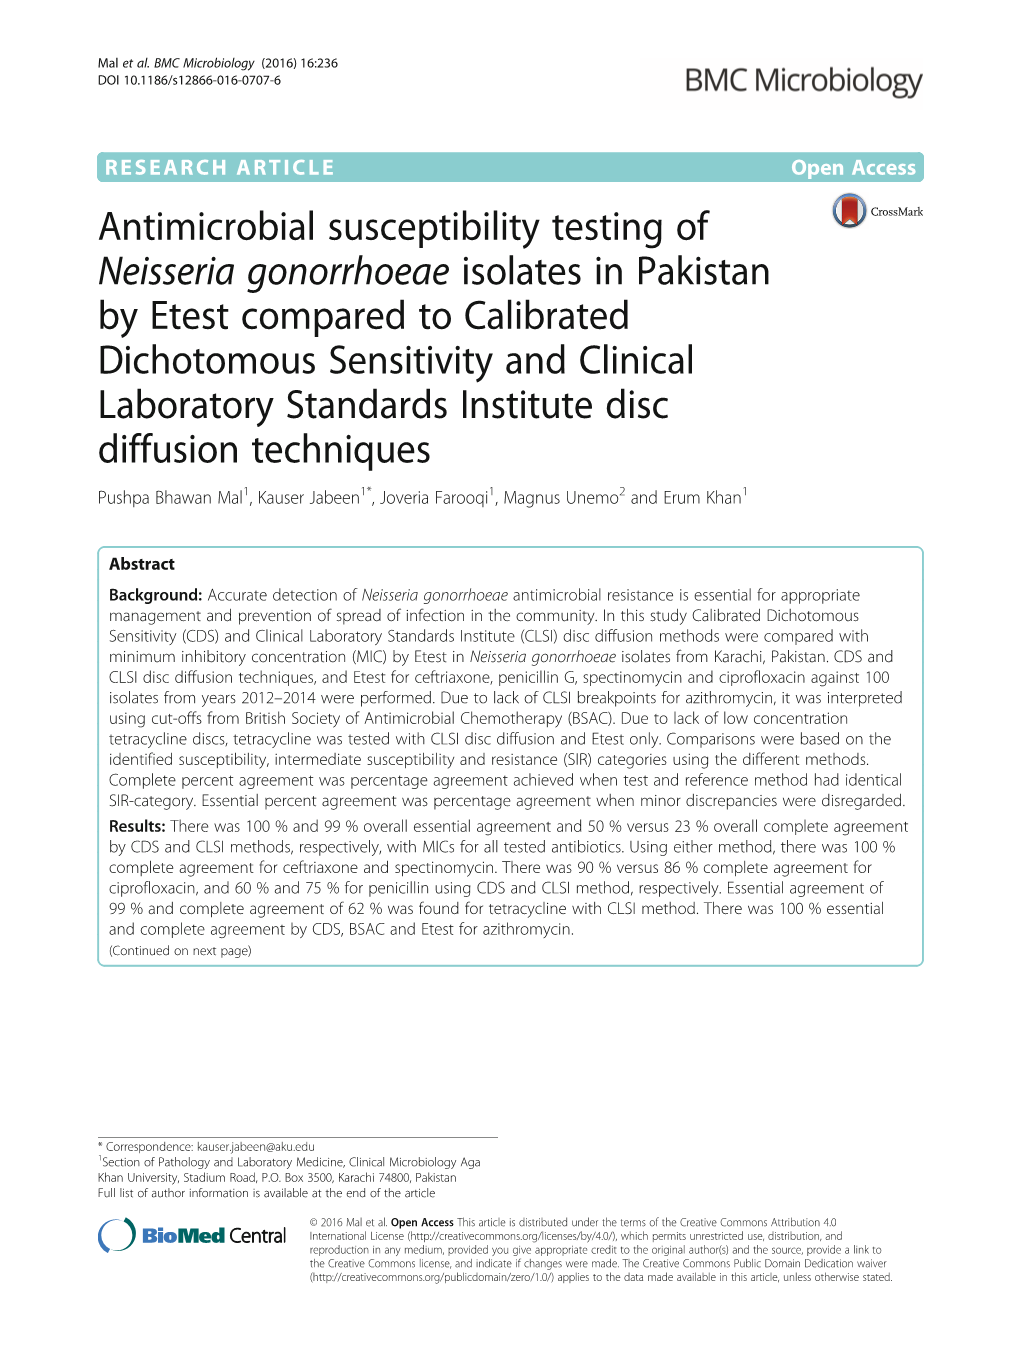 Antimicrobial Susceptibility Testing of Neisseria Gonorrhoeae Isolates In